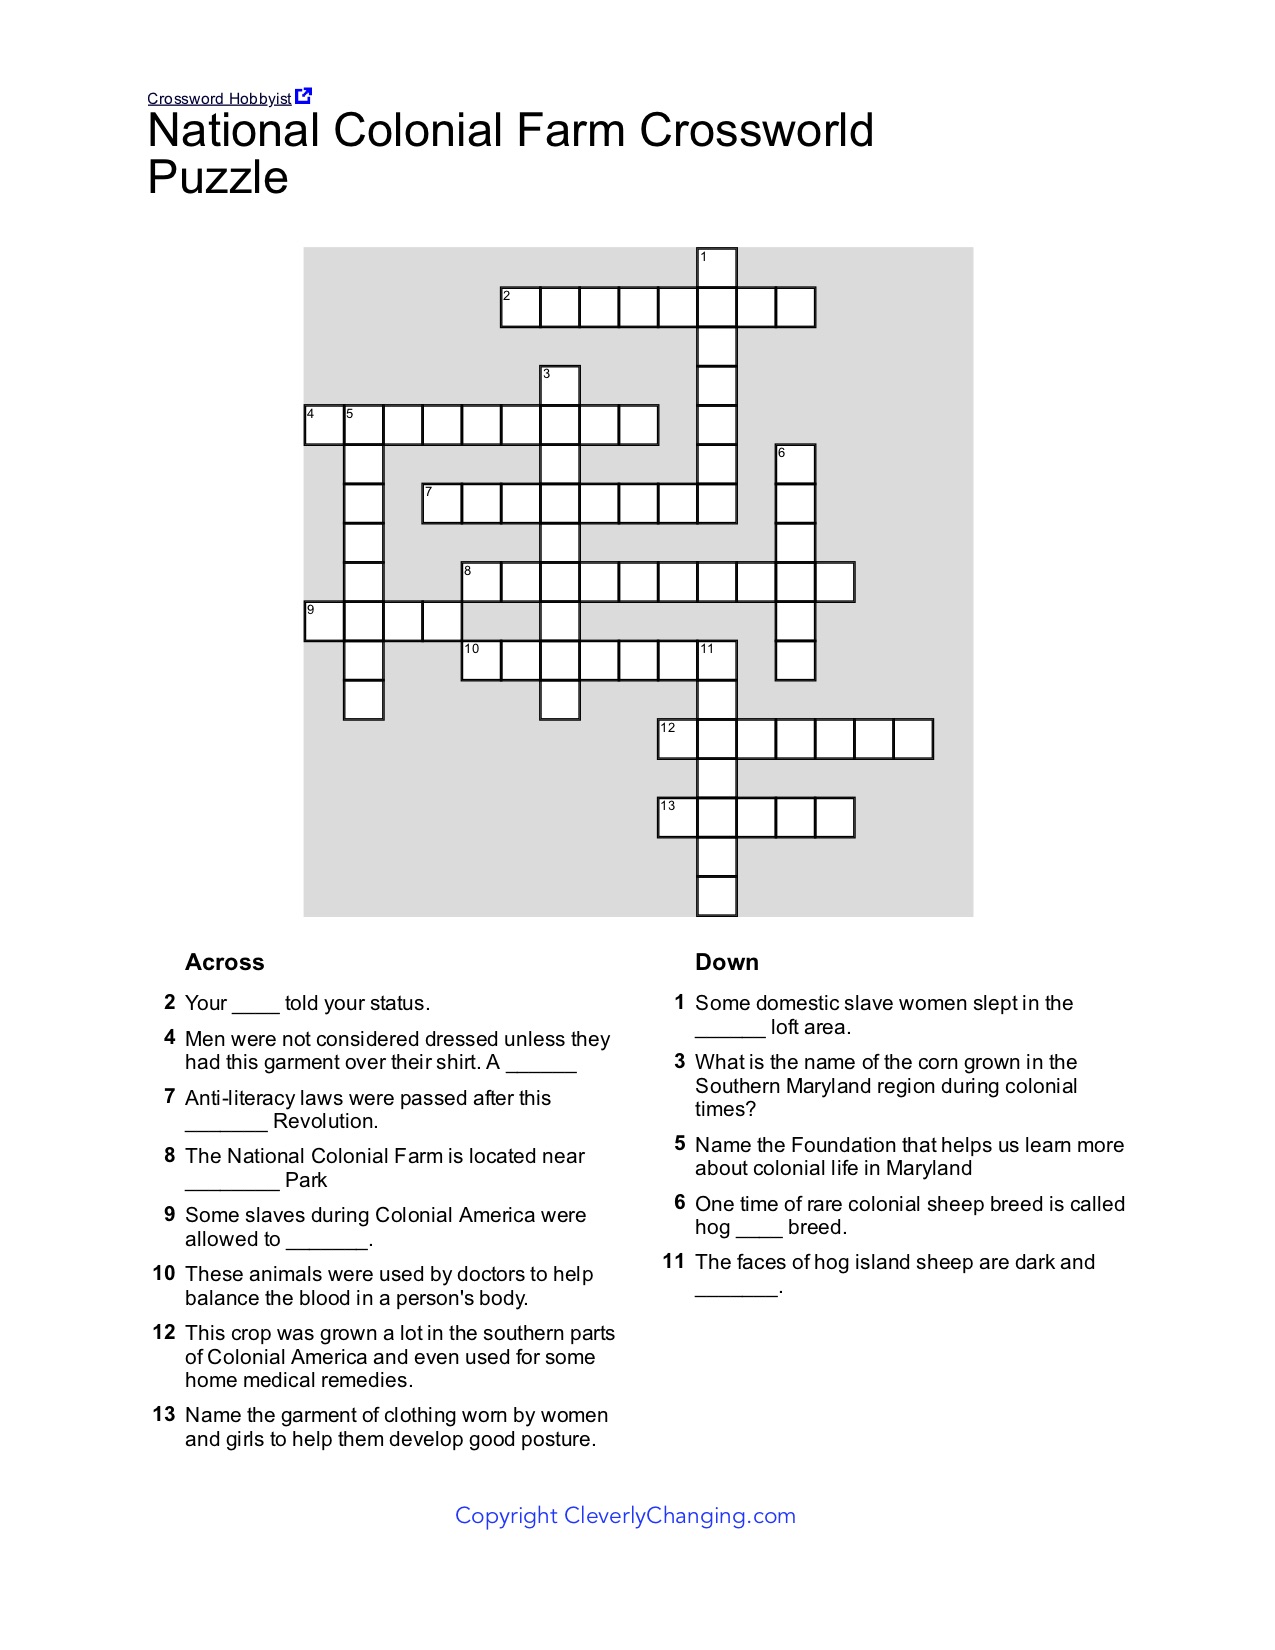 National Colonial Farm Crossword Puzzle